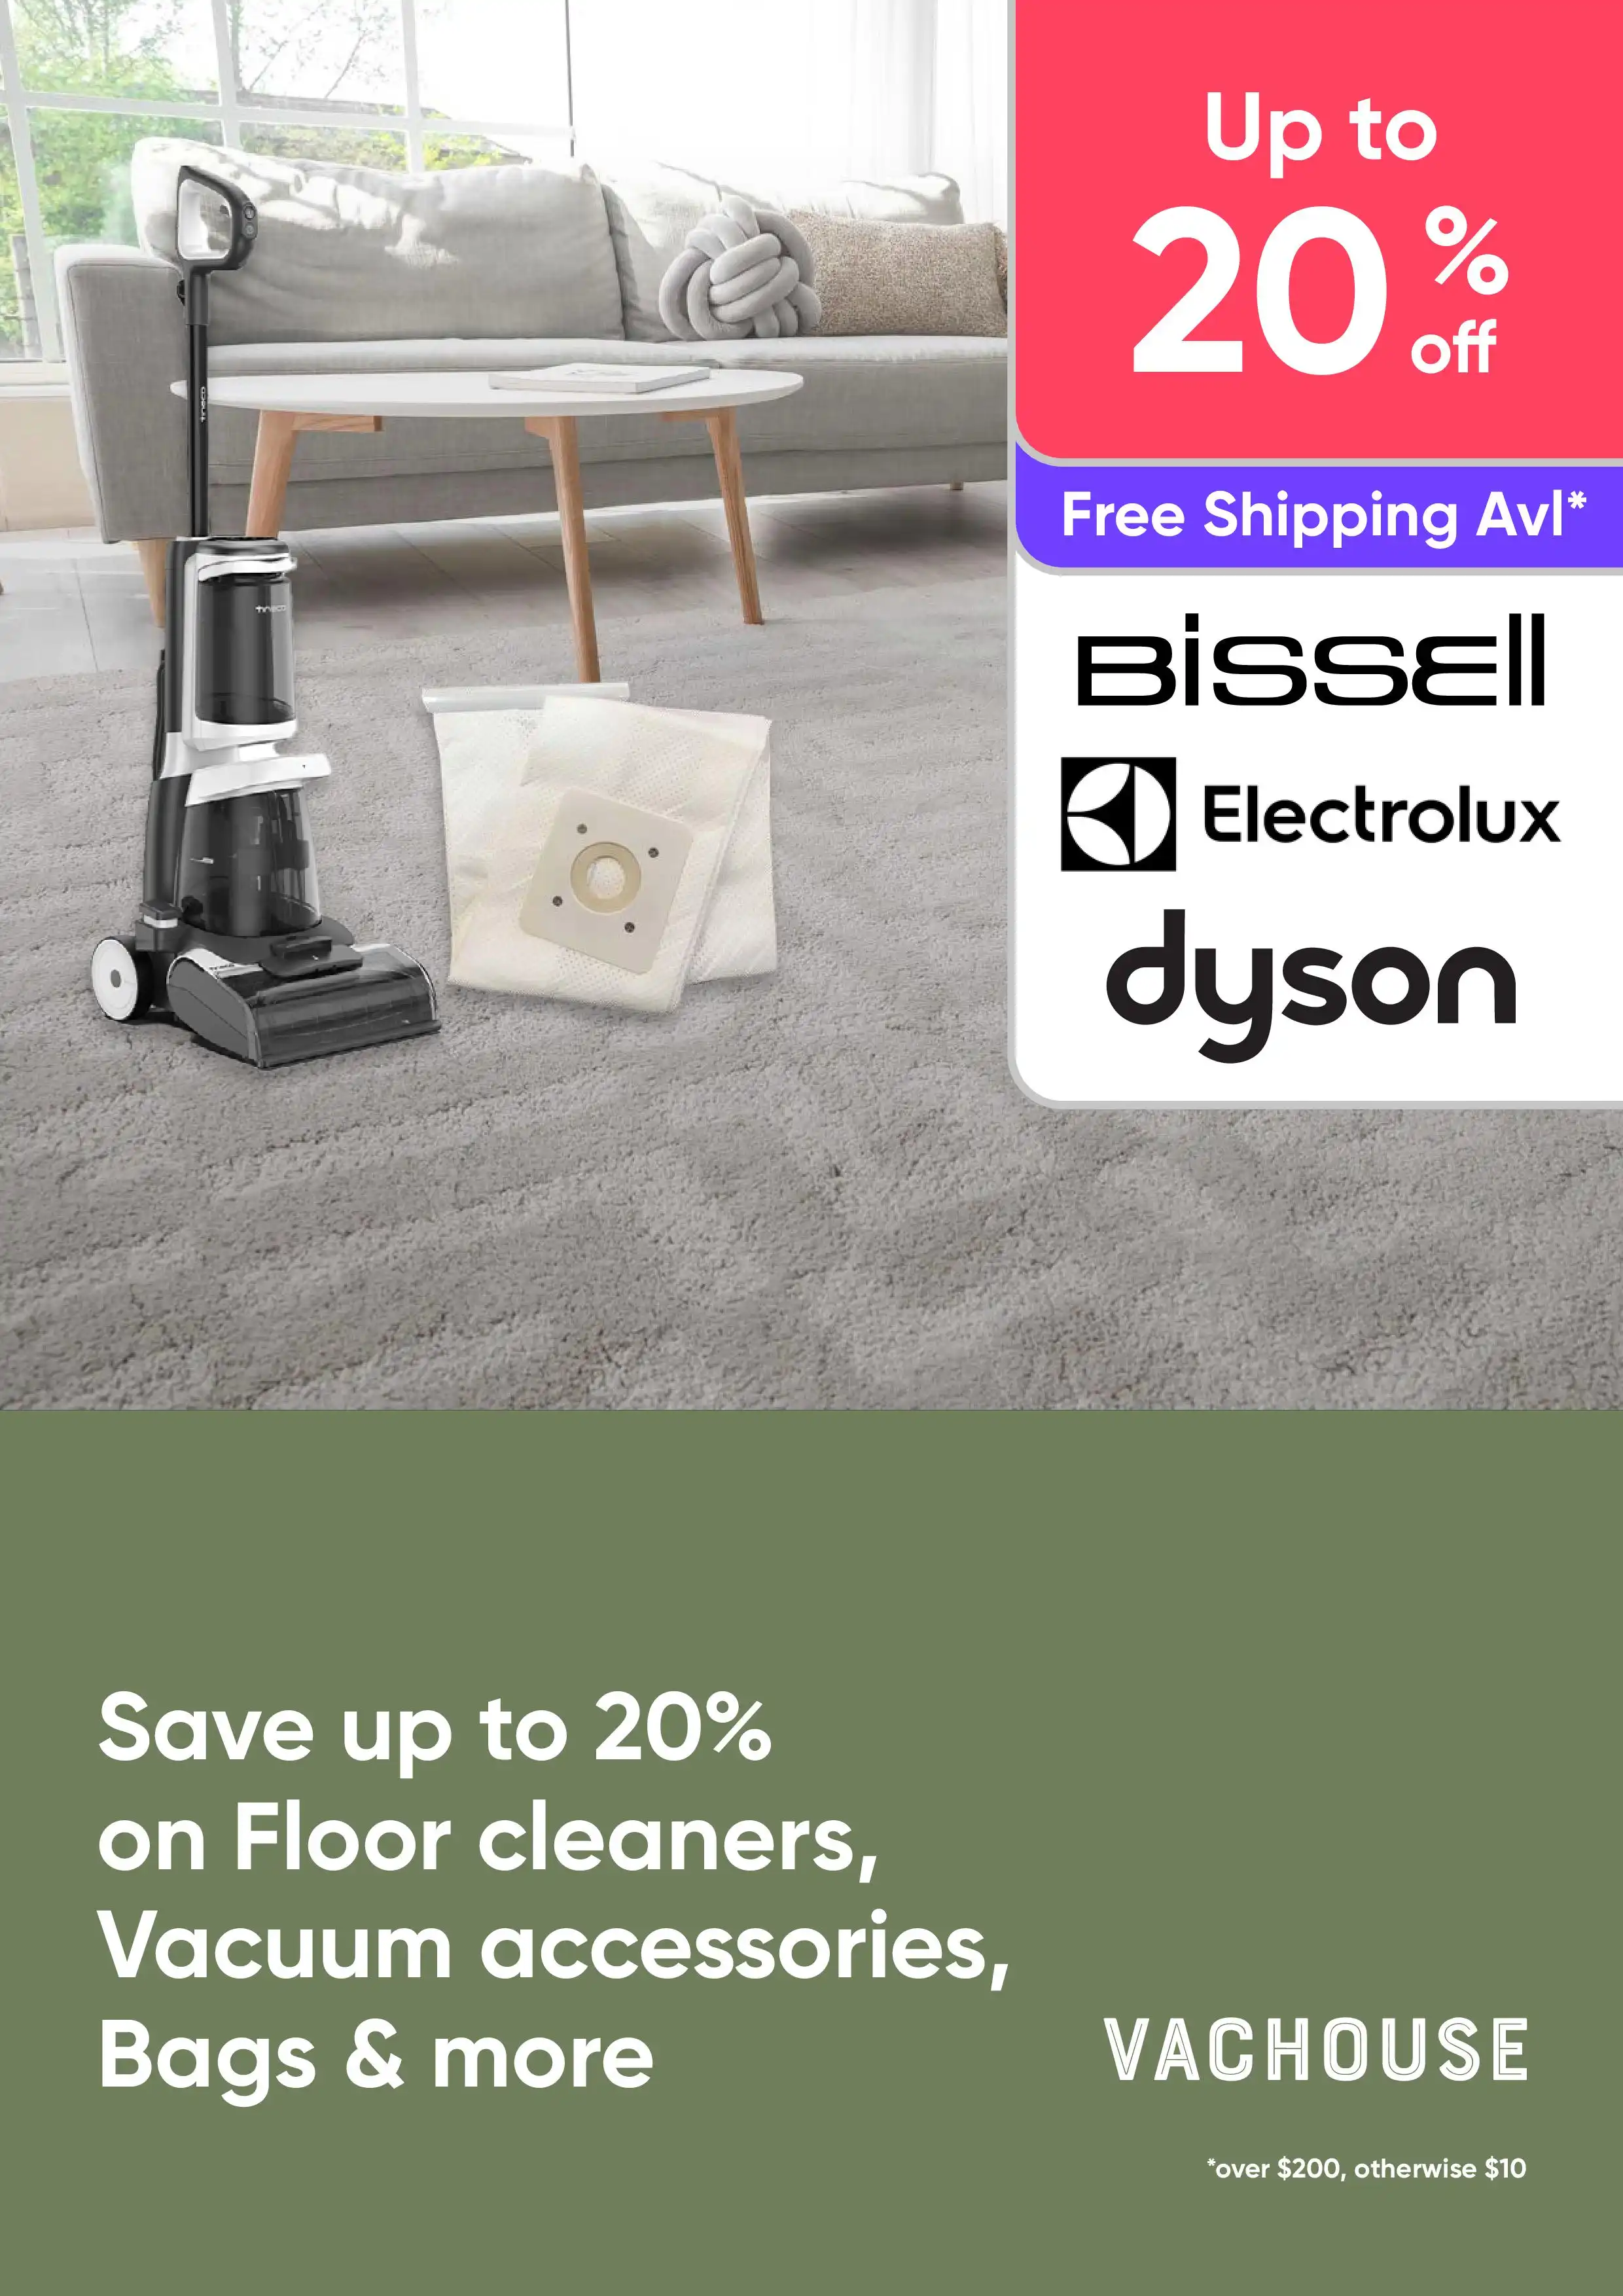 Save up to 20% of Floor cleaners, Vacuum accessories, Bags & more